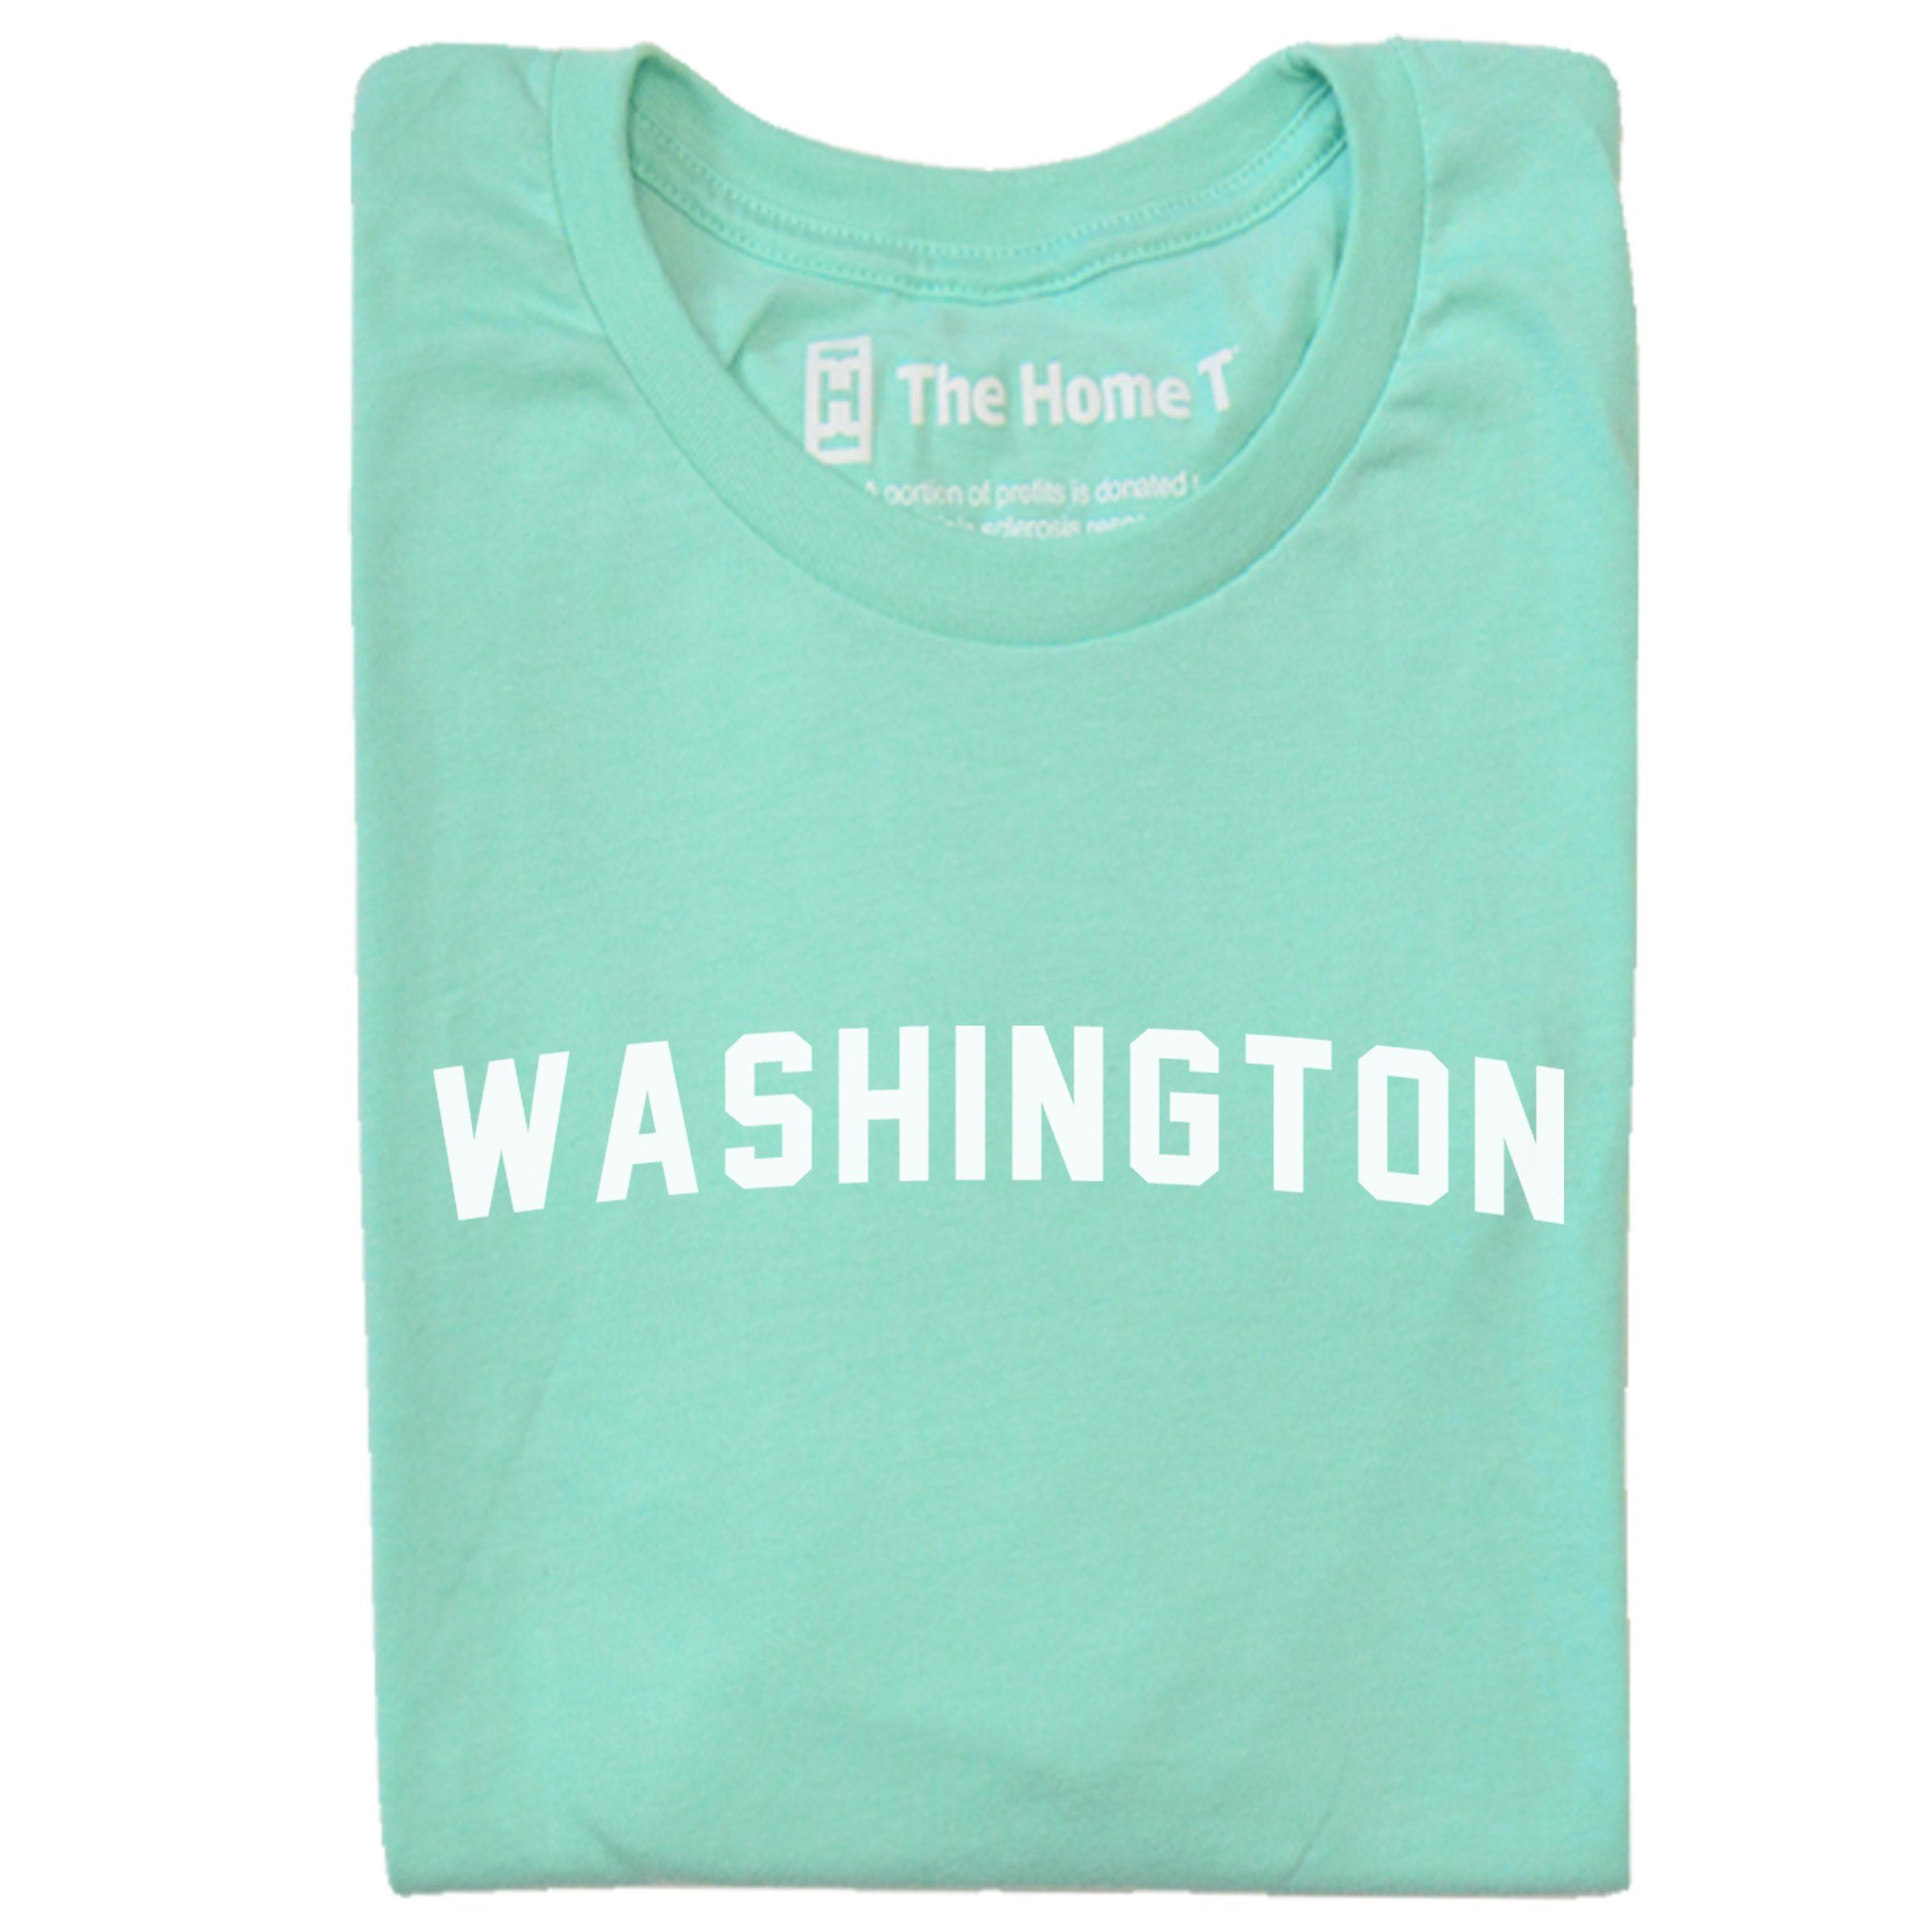 Washington Arched The Home T XS Mint